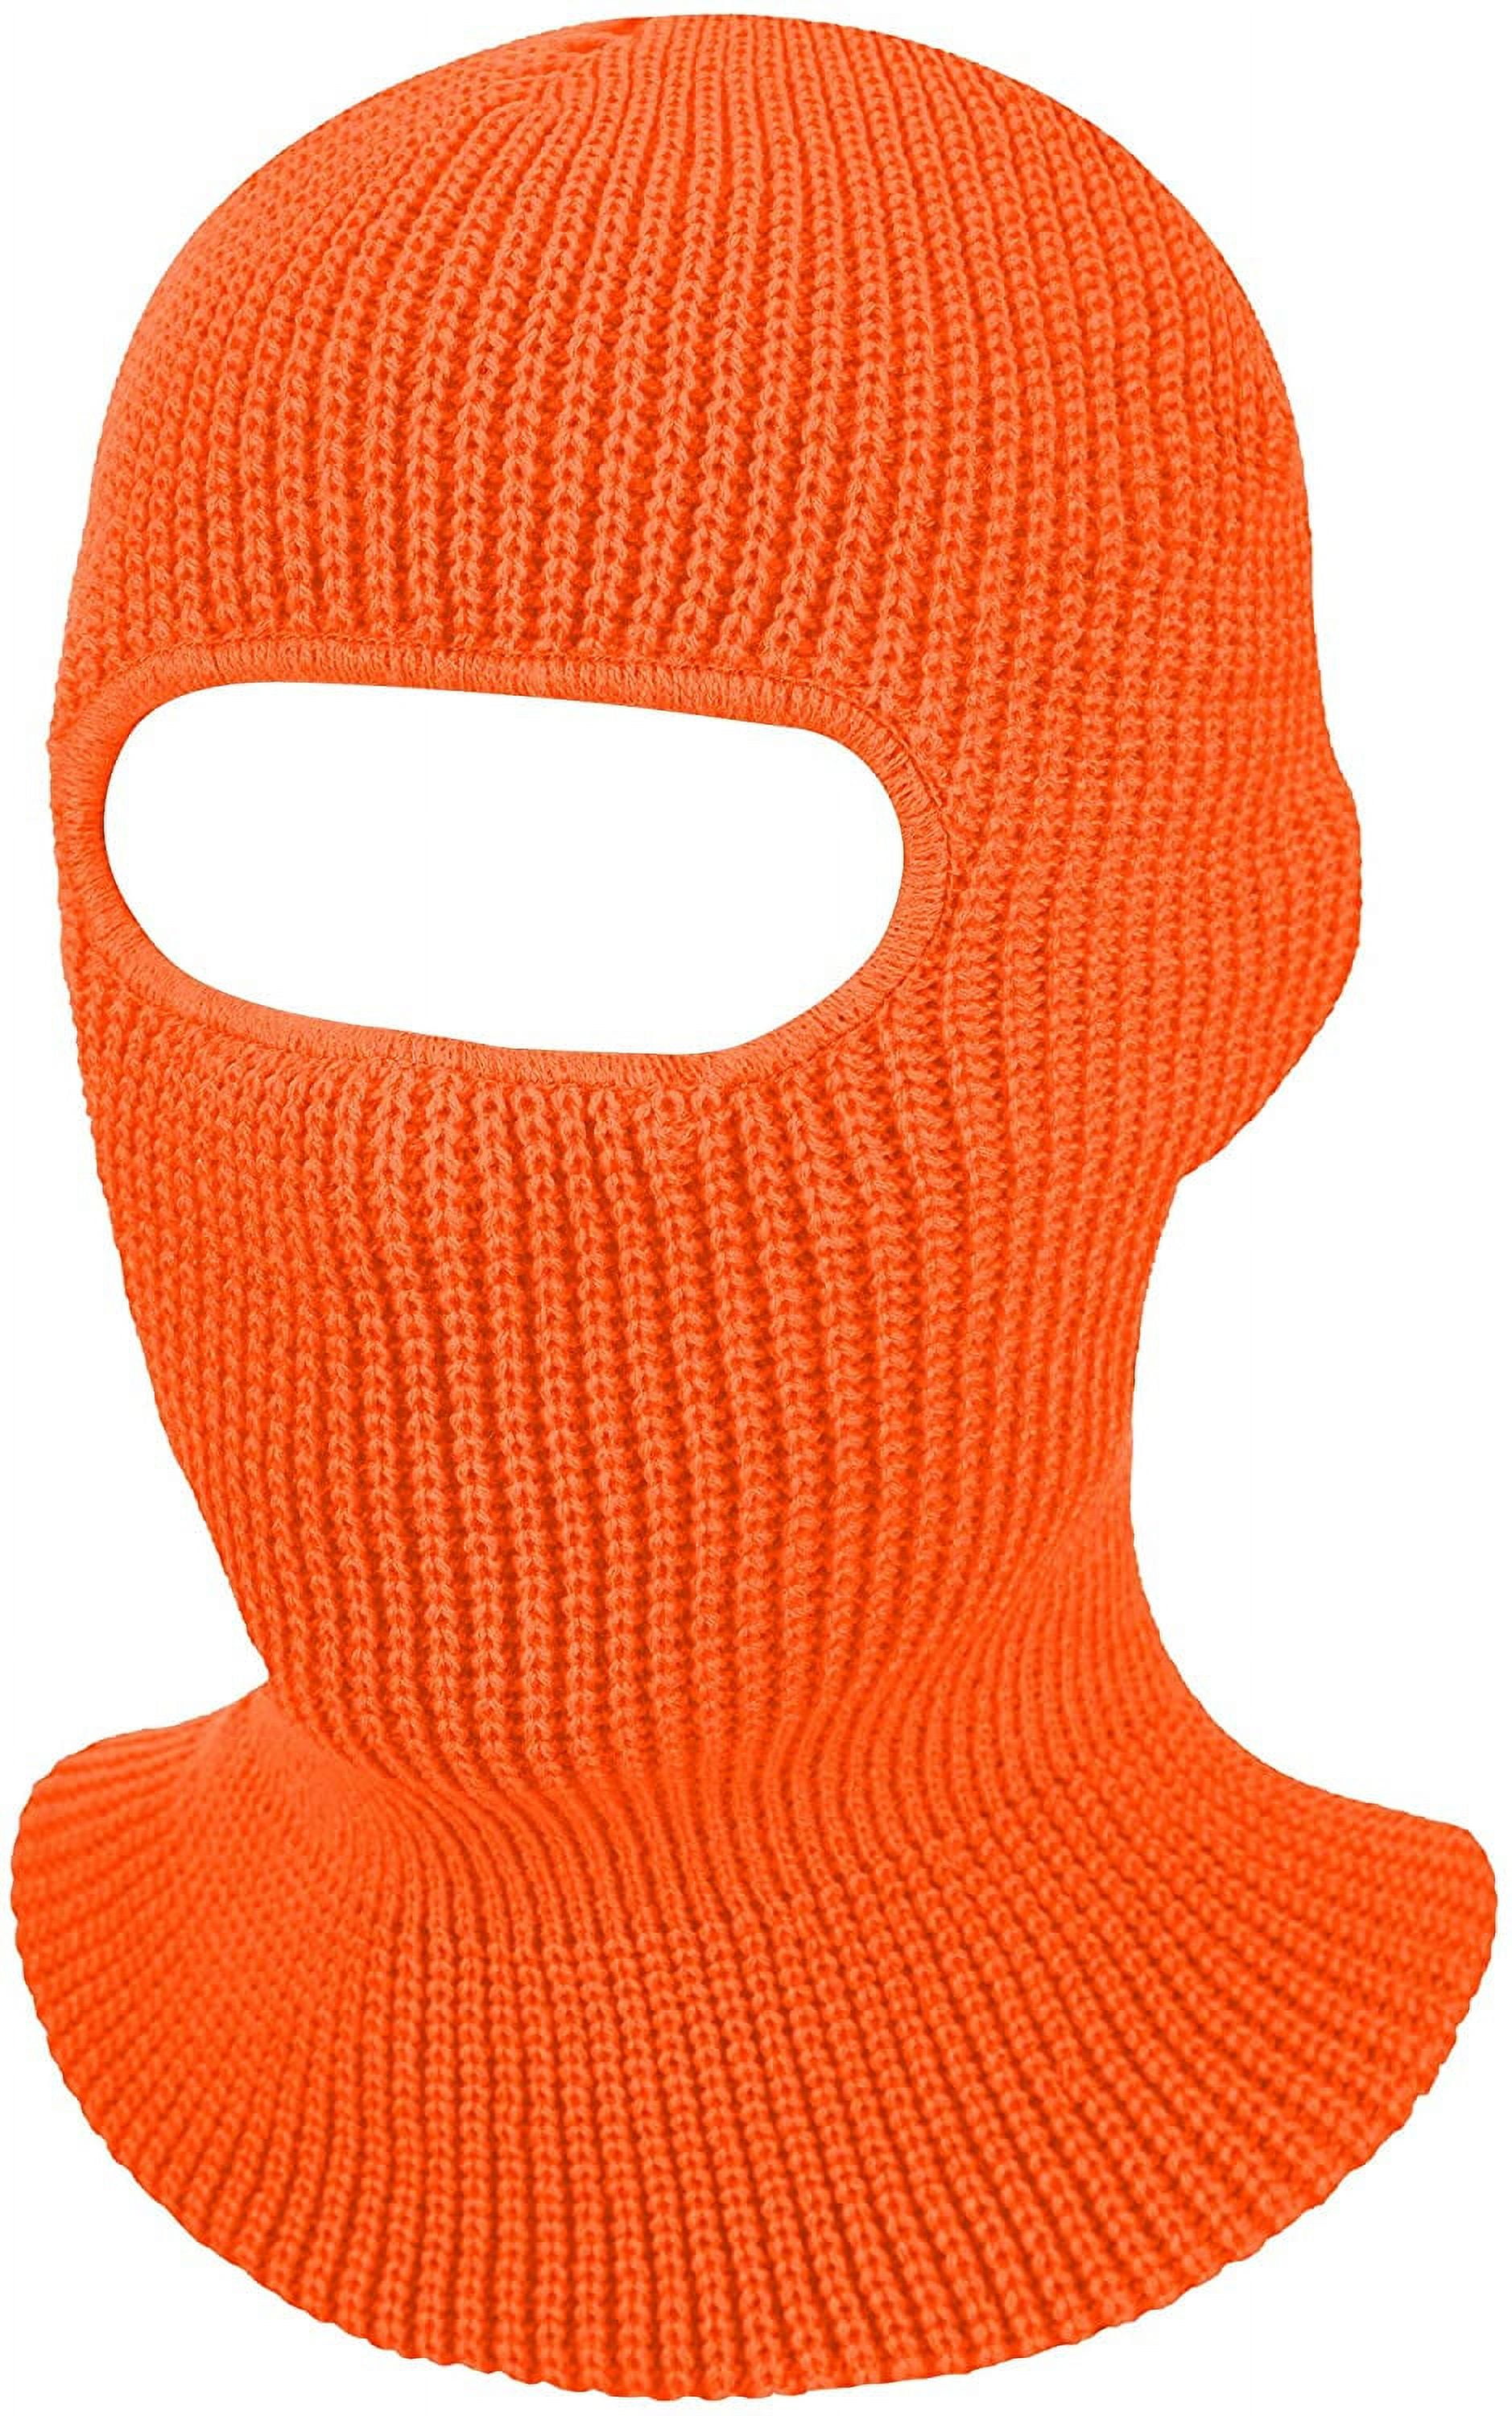 Knit Sports, Warm Cap Unisex for Face Cover 1-Hole Balaclava Mask Ski Outdoor Knitted Beanie Adult Pink Winter Face Balaclava ZOELNIC Full